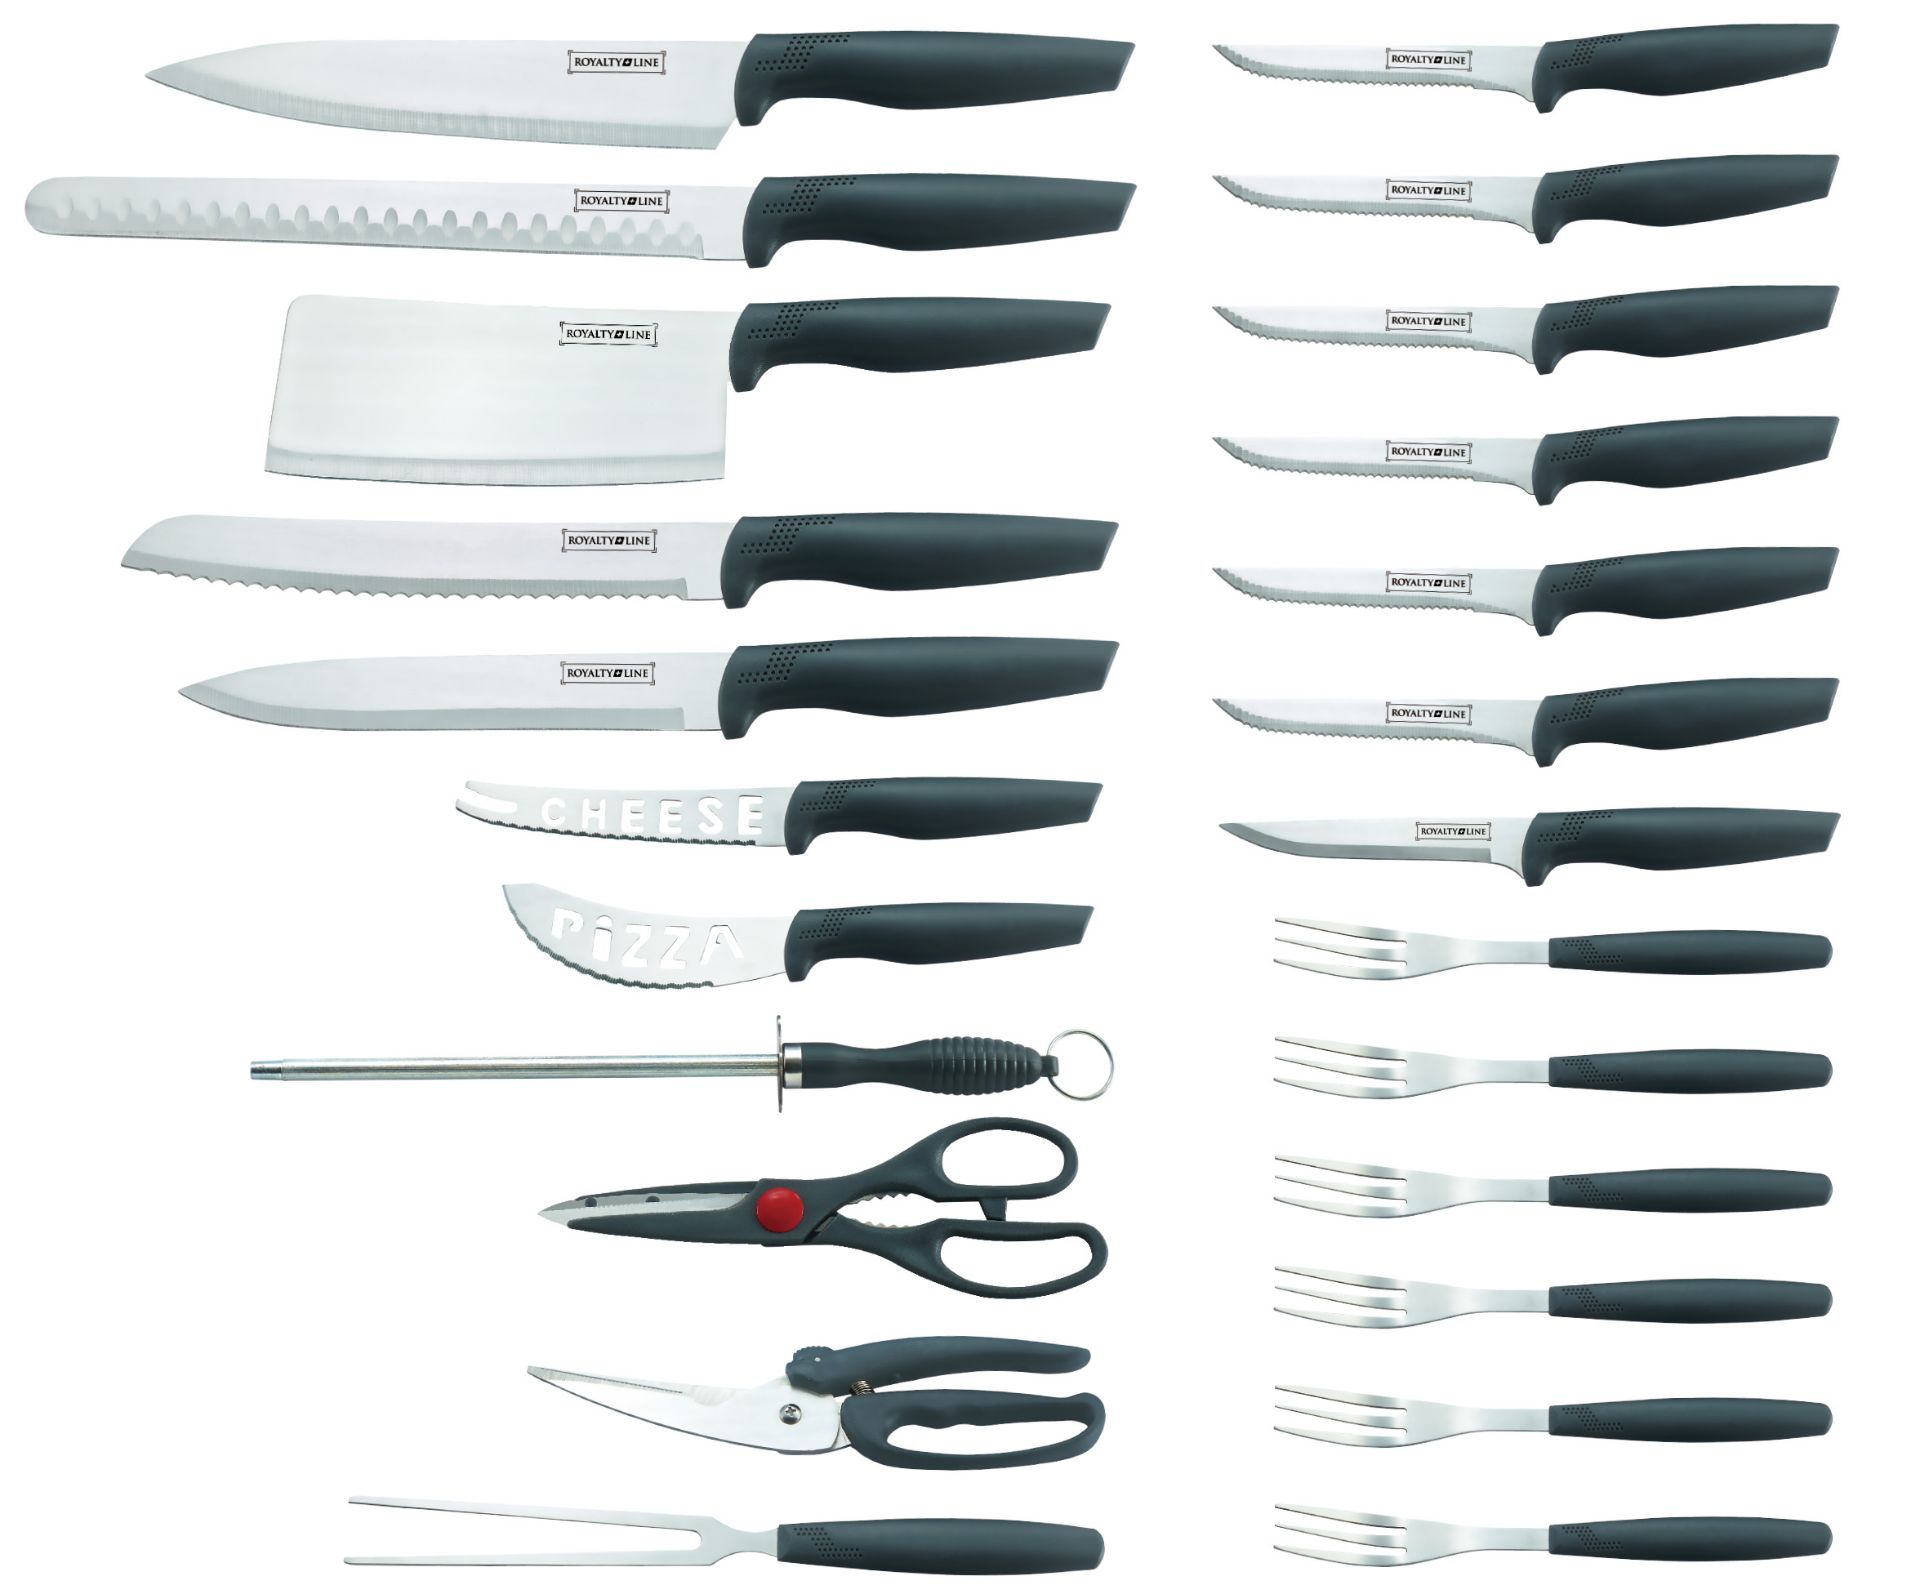 V *TRADE QTY* Brand New 24 Piece Stainless Steel Knife Set - Includes 6 x Forks and 6 x Steak Knives